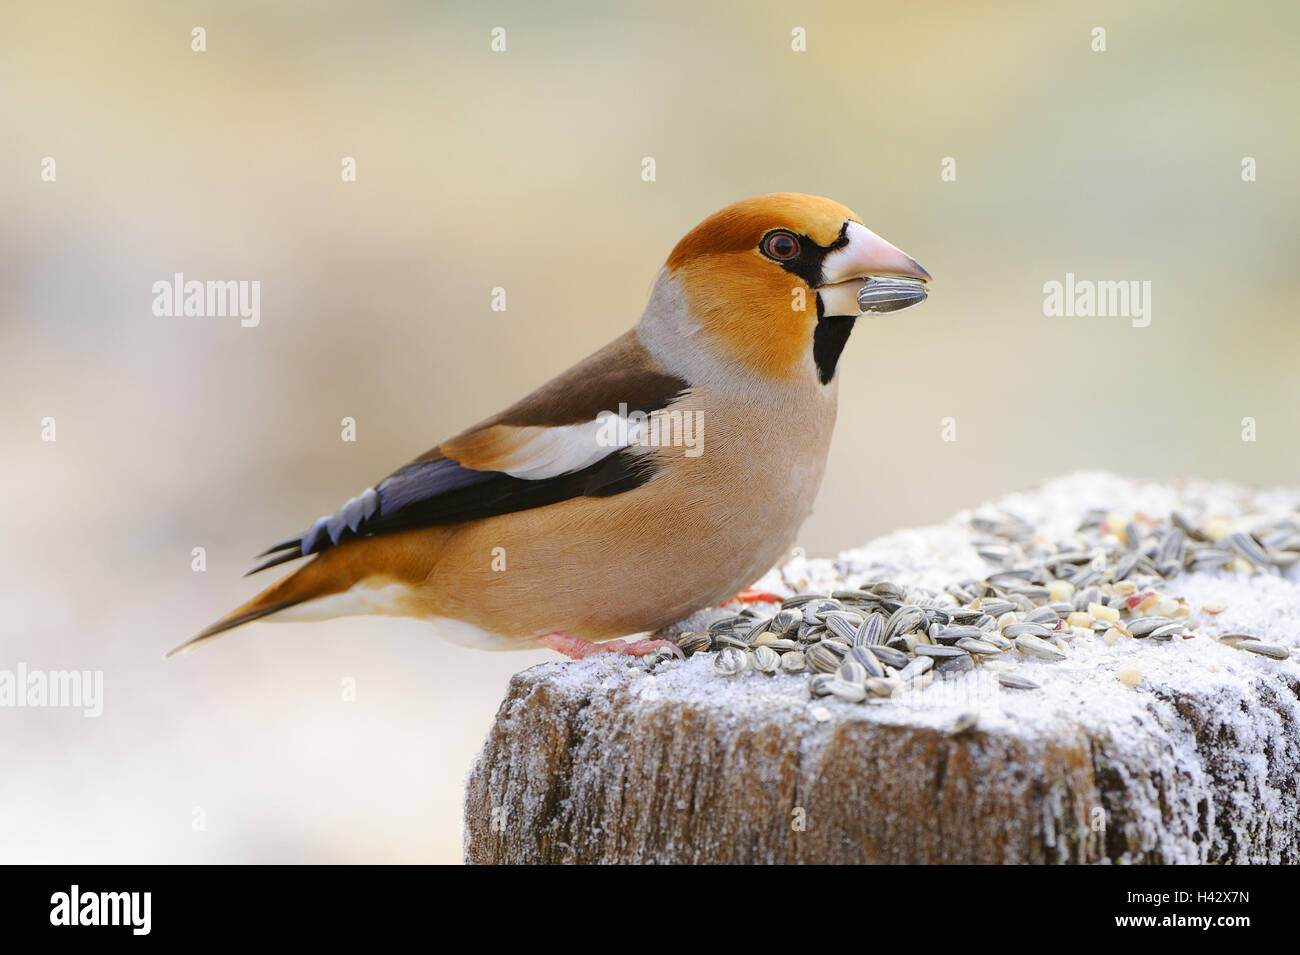 Hawfinches, Coccothraustes coccothraustes, feeding ground, eat, winter, Stock Photo